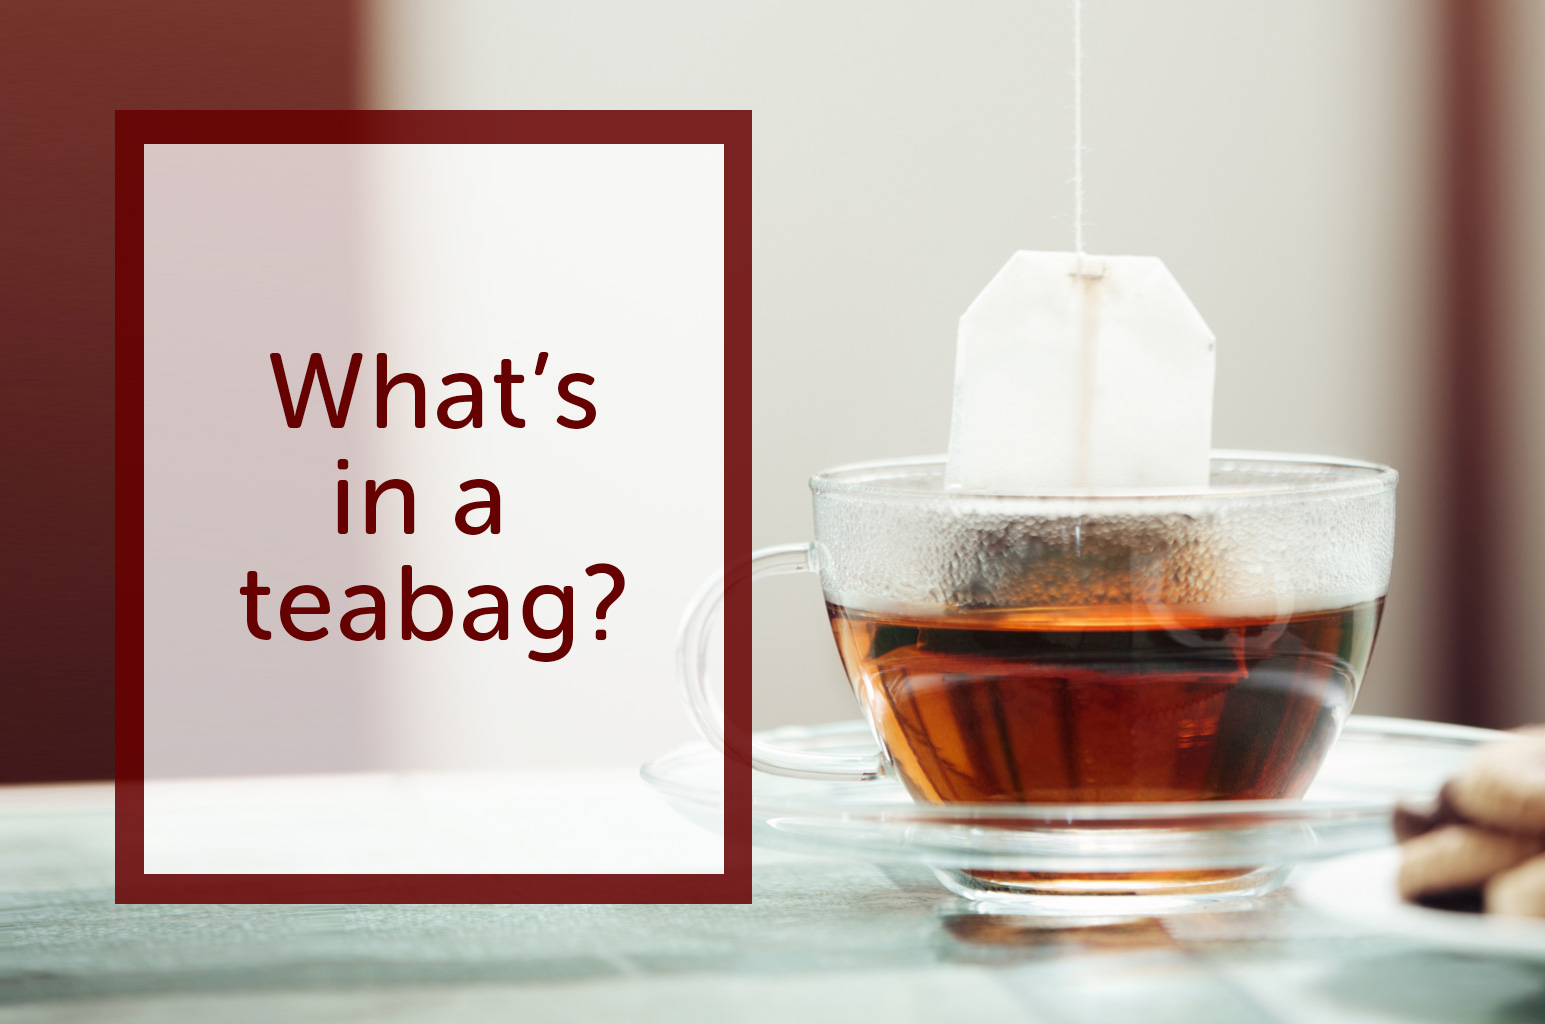 What’s in a teabag?